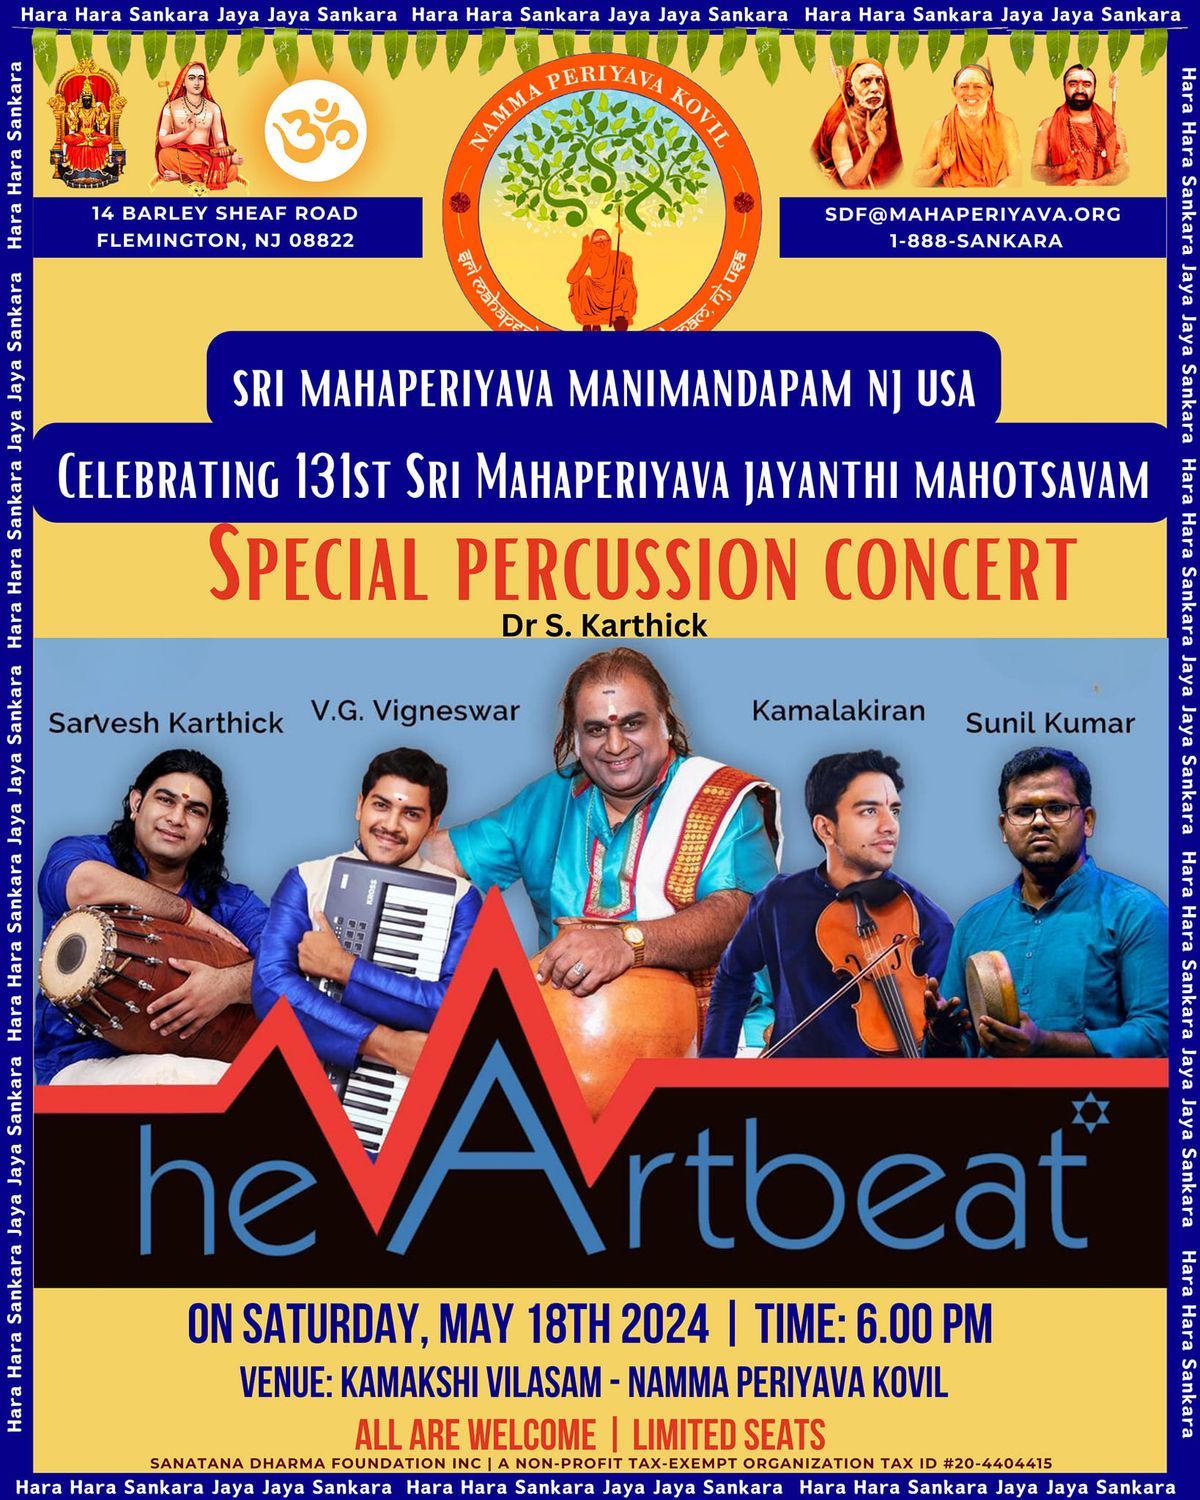 Heartbeat - A Special Percussion Concert